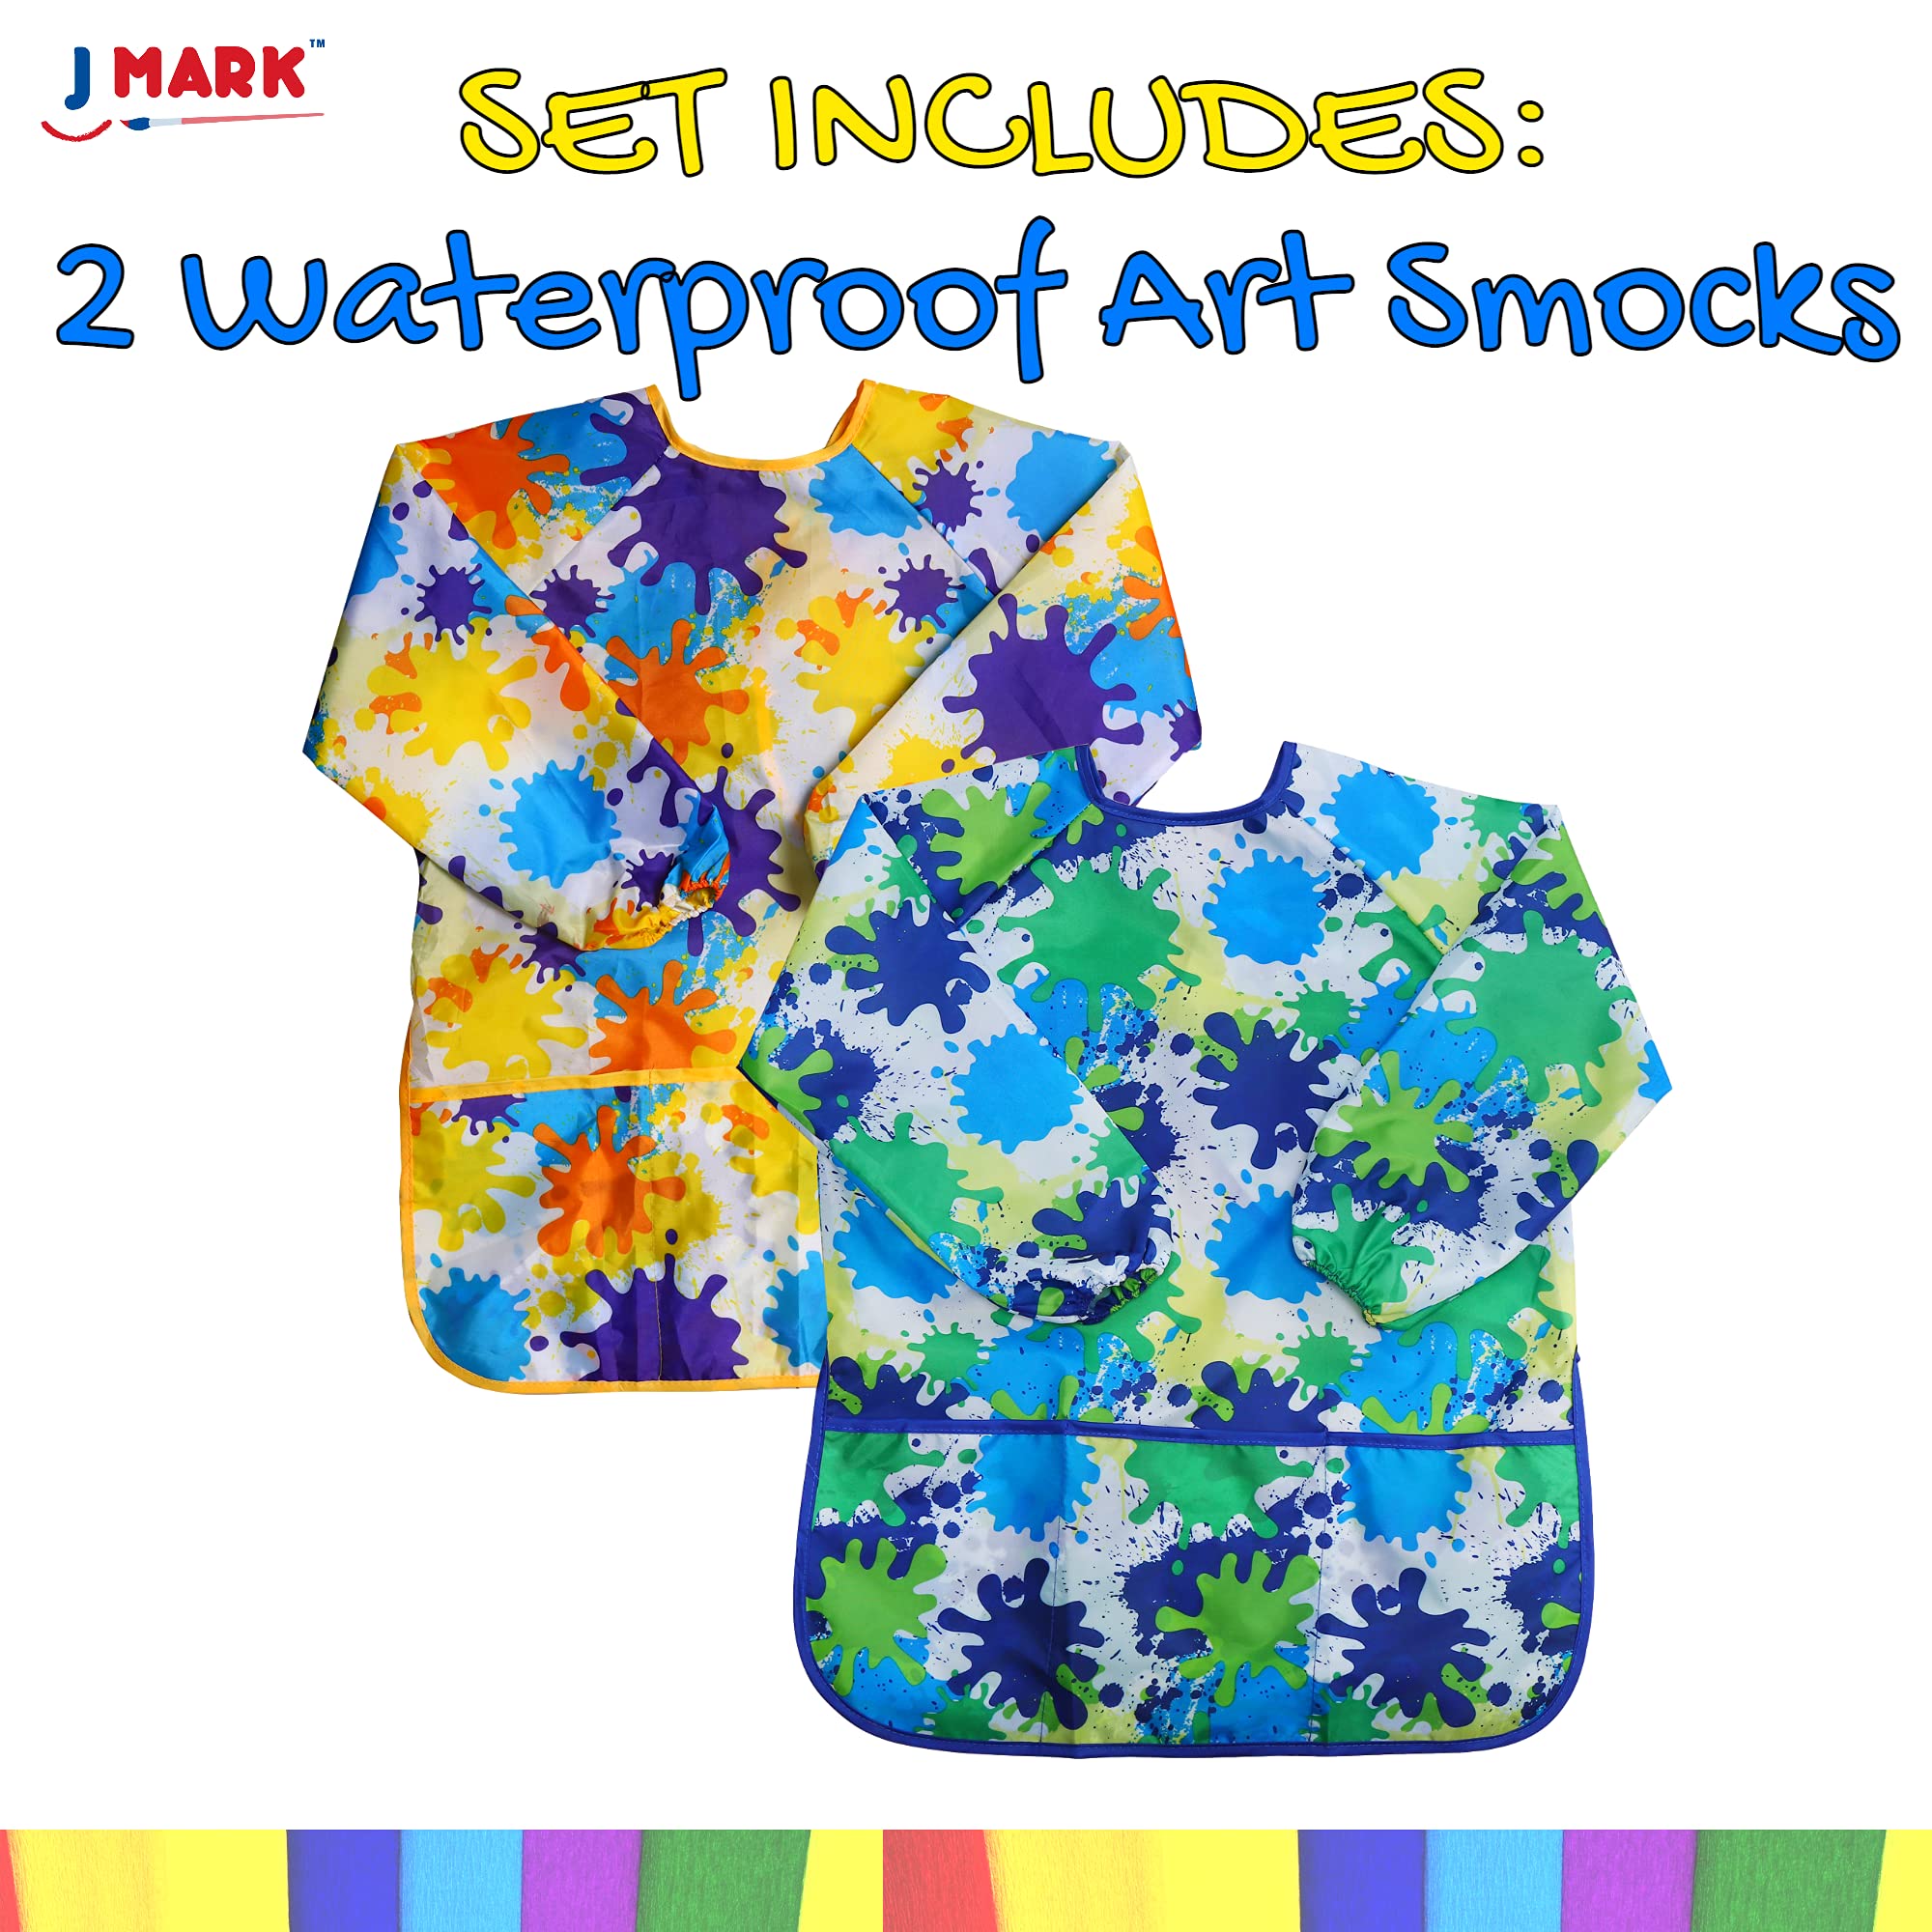 J MARK Waterproof Kids Art Smock Painting Apron 2 Pack Long Sleeve and 2 Pockets for Baking, Eating, Arts & Crafts